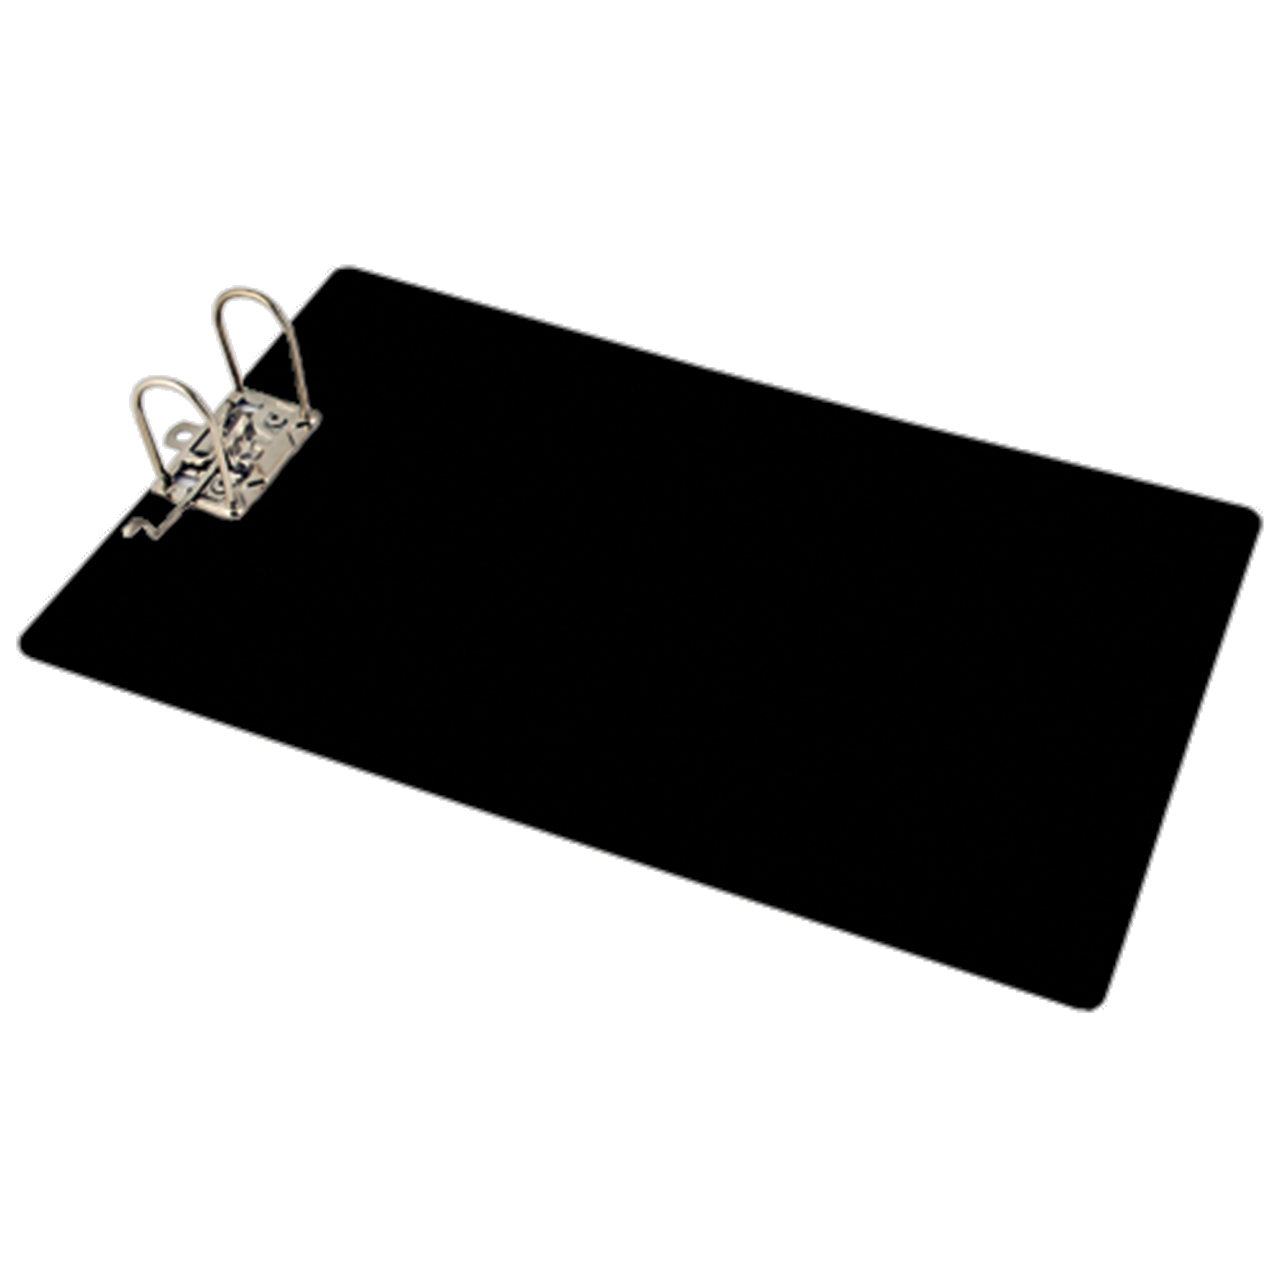 11x17 Clipboard Acrylic Panel Featuring an 8 Hinge Clip Red